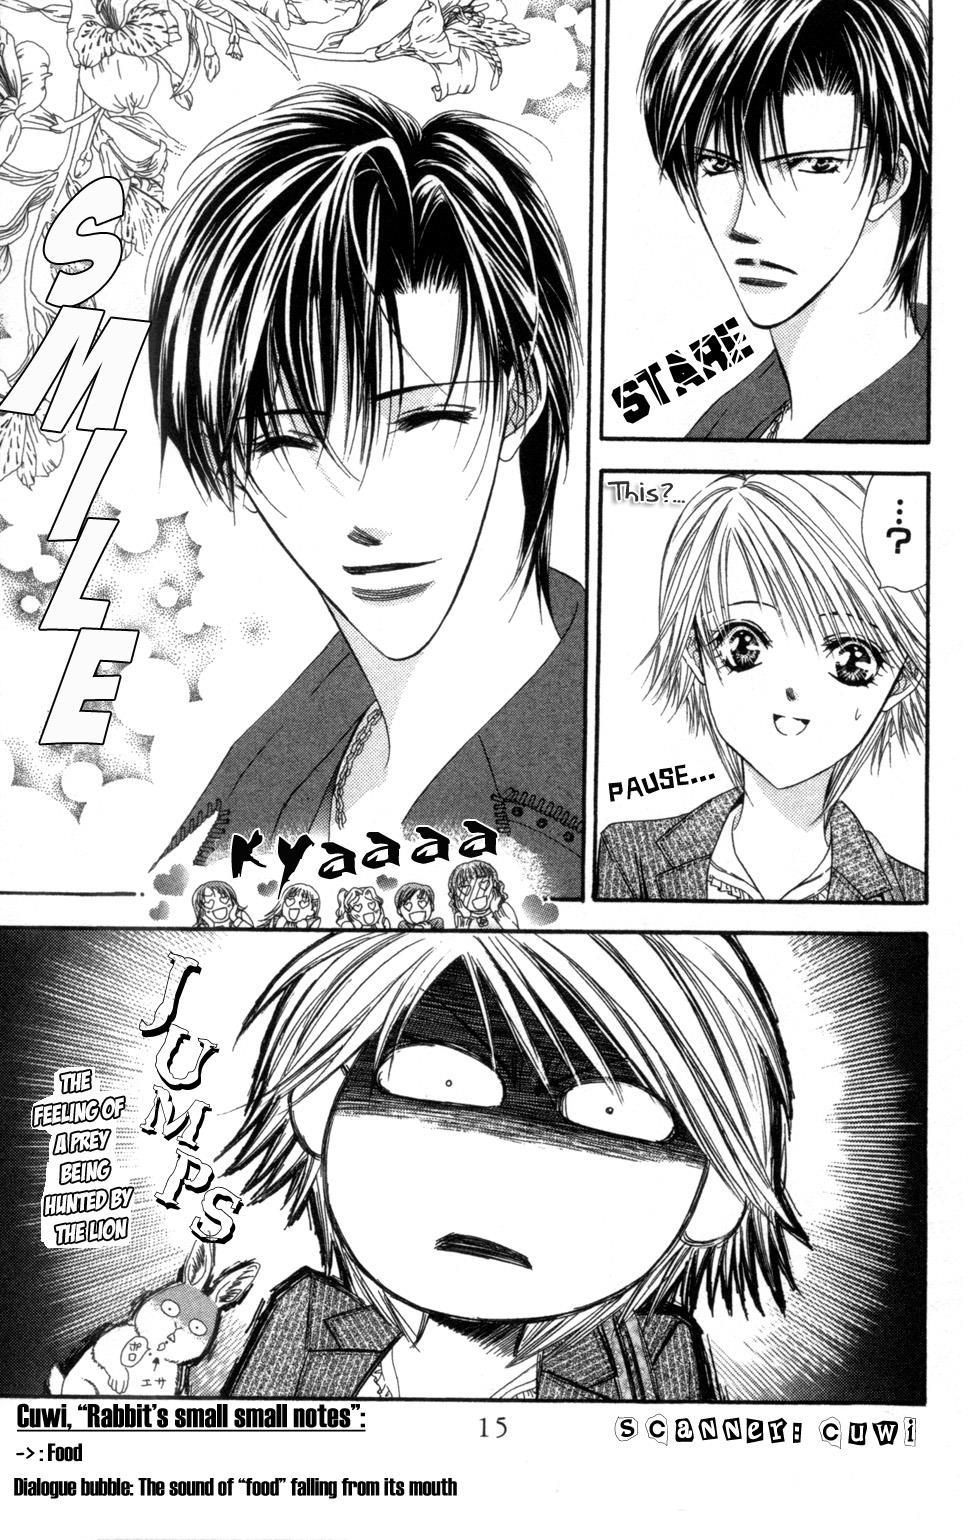 Skip Beat!, Chapter 24 The Other Side of Impact image 13